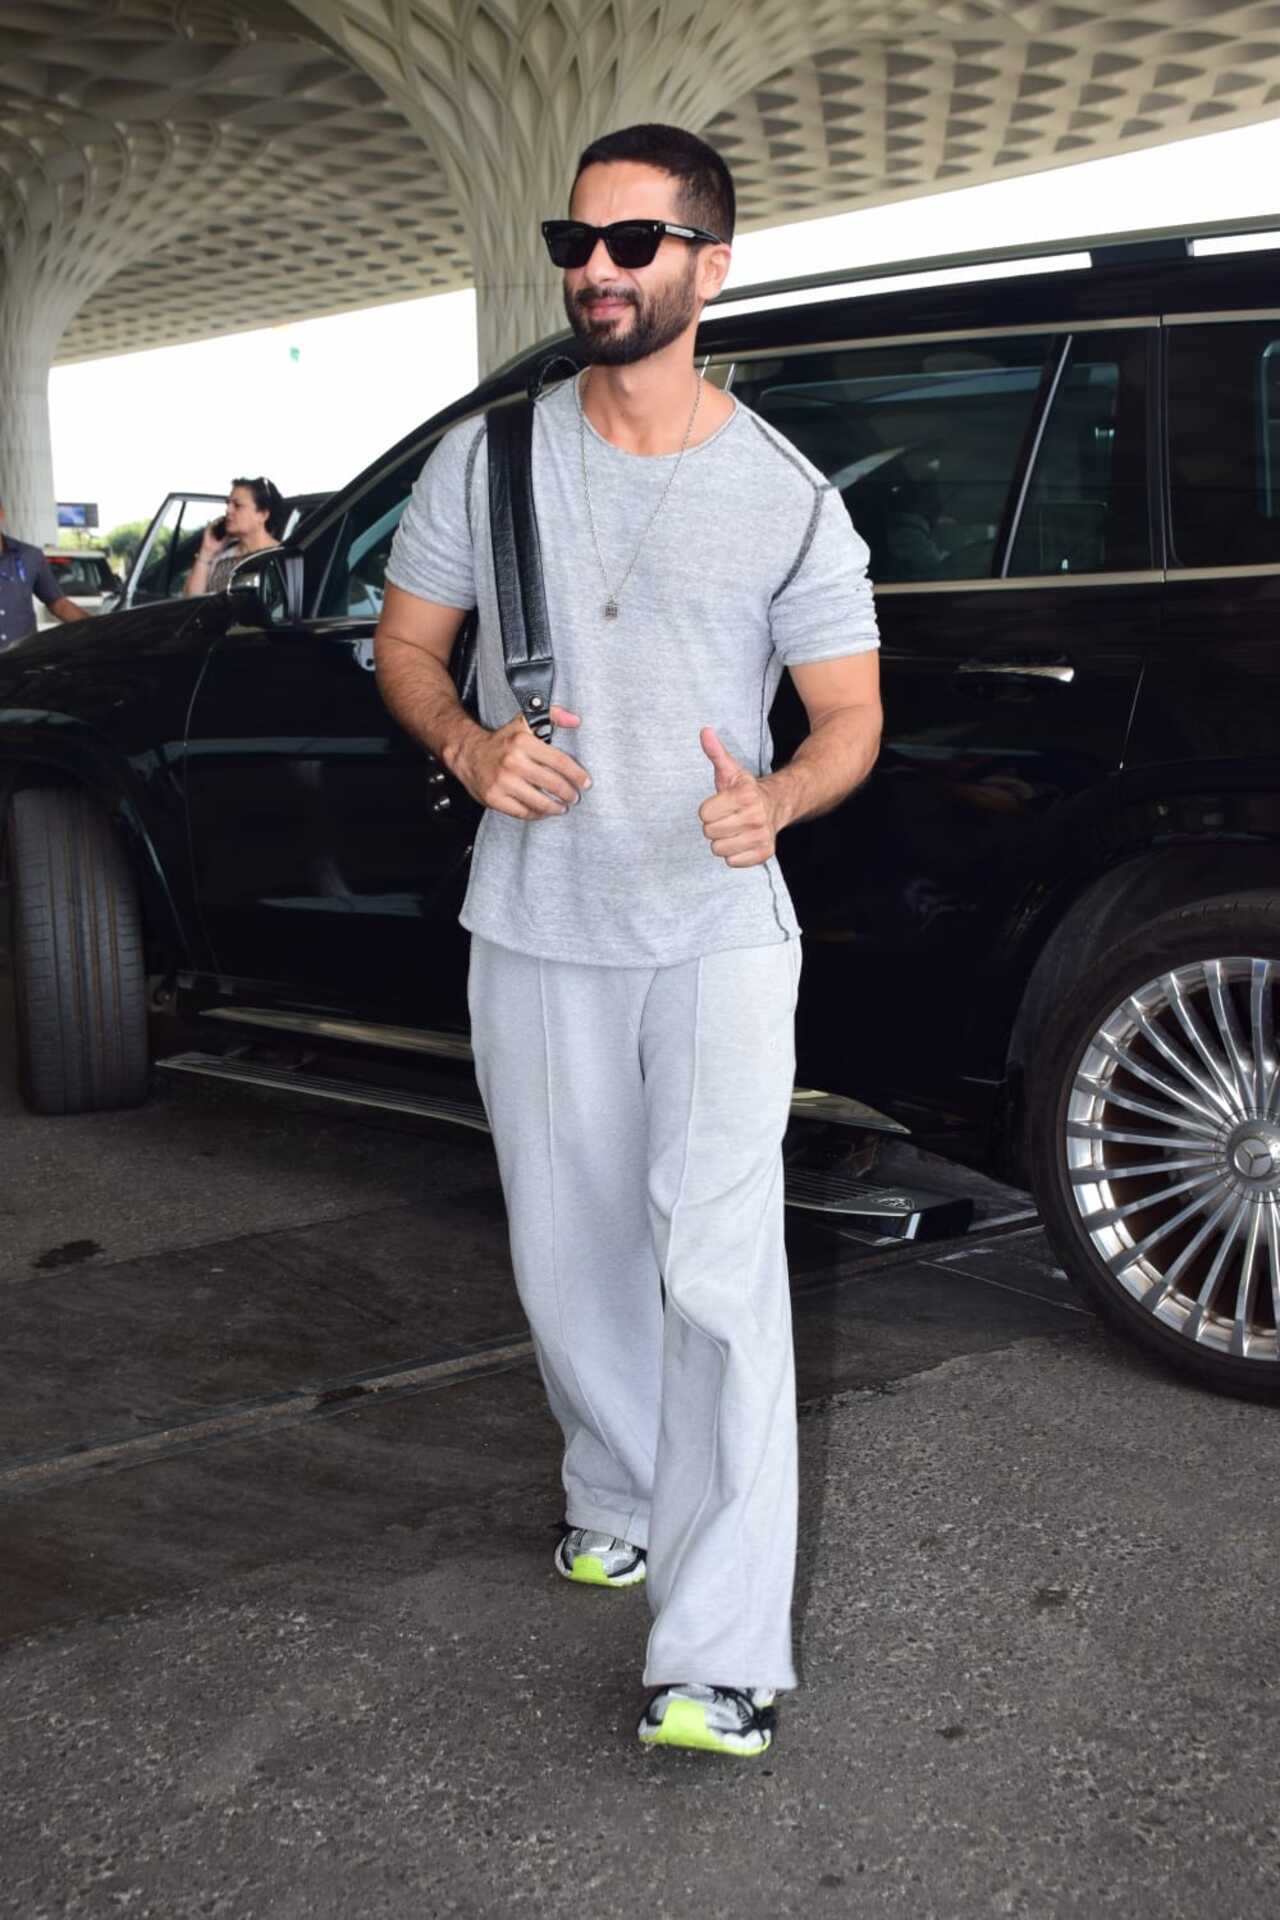 Shahid Kapoor was spotted in a jolly mood at the Mumbai airport